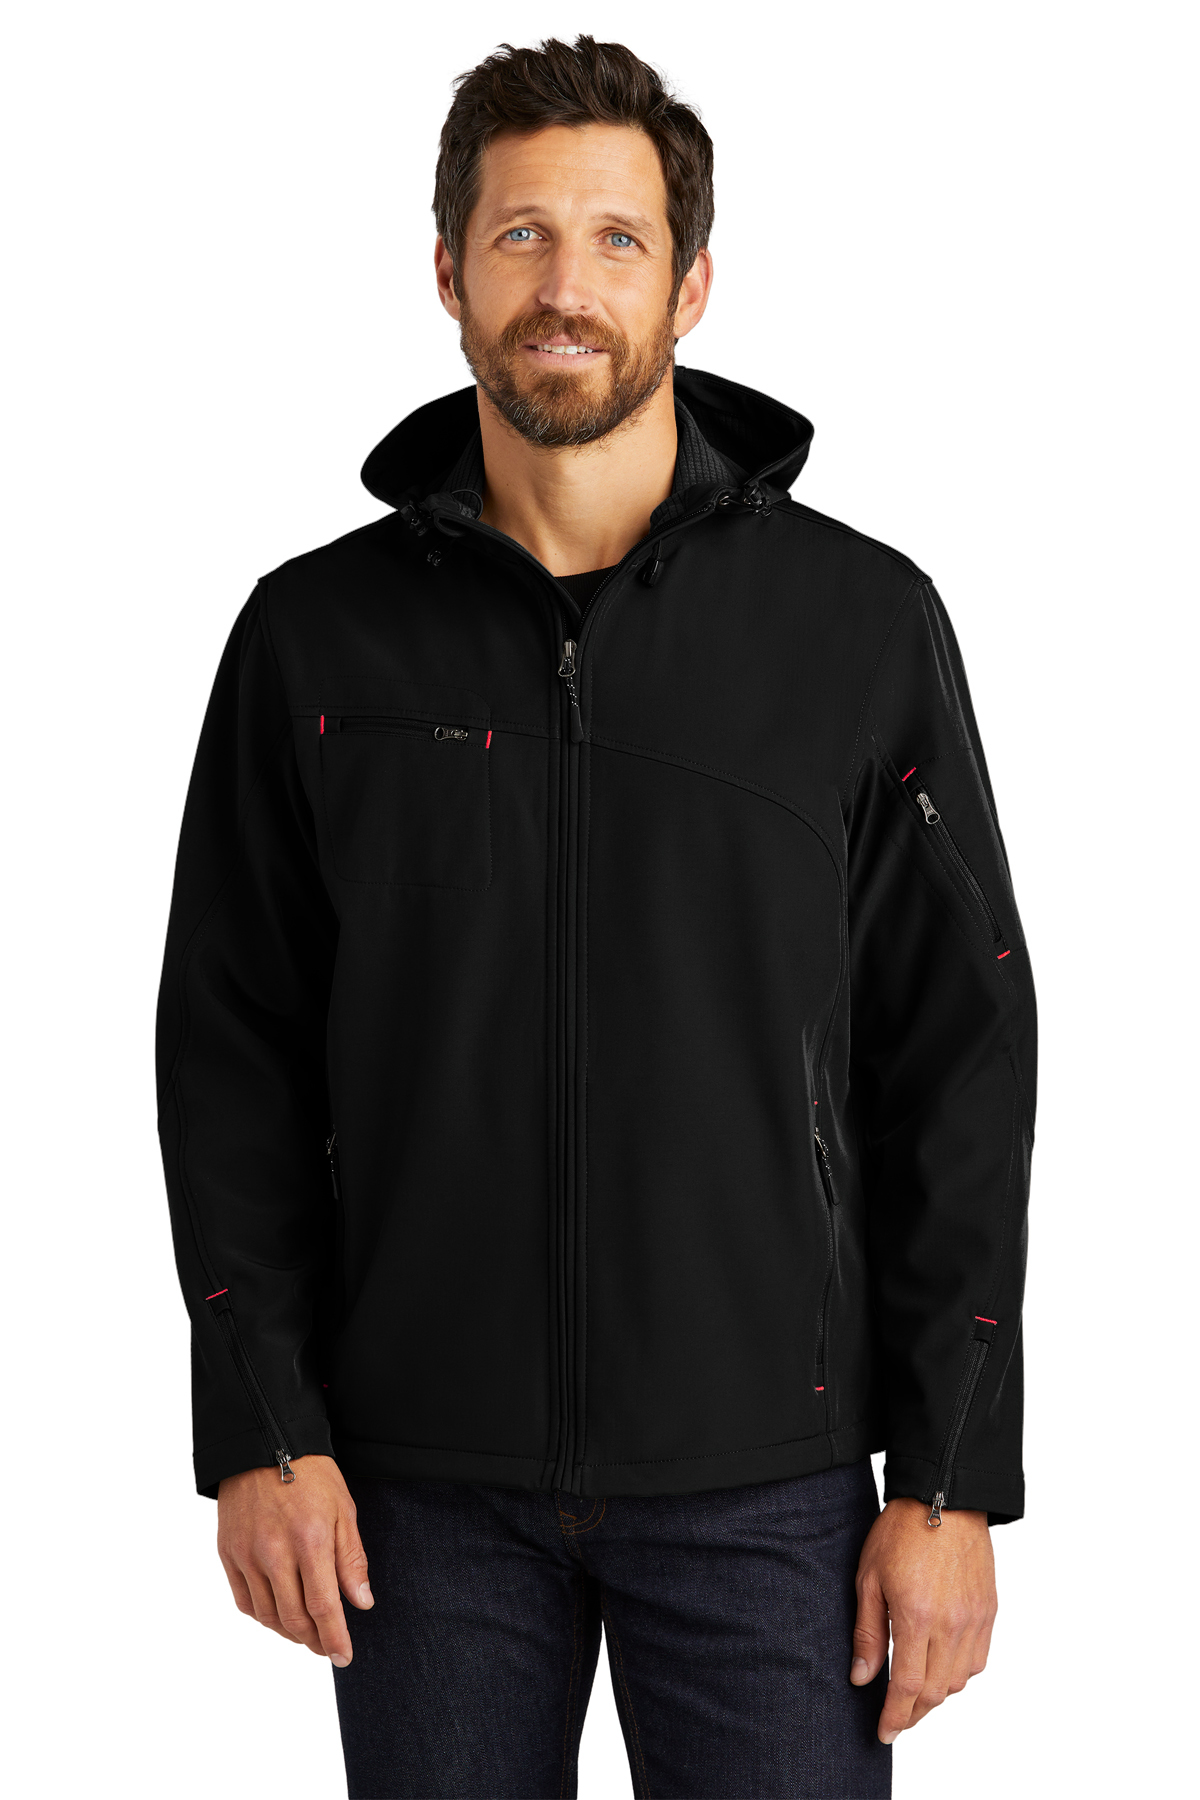 Port Authority Textured Soft Shell Jacket, Product